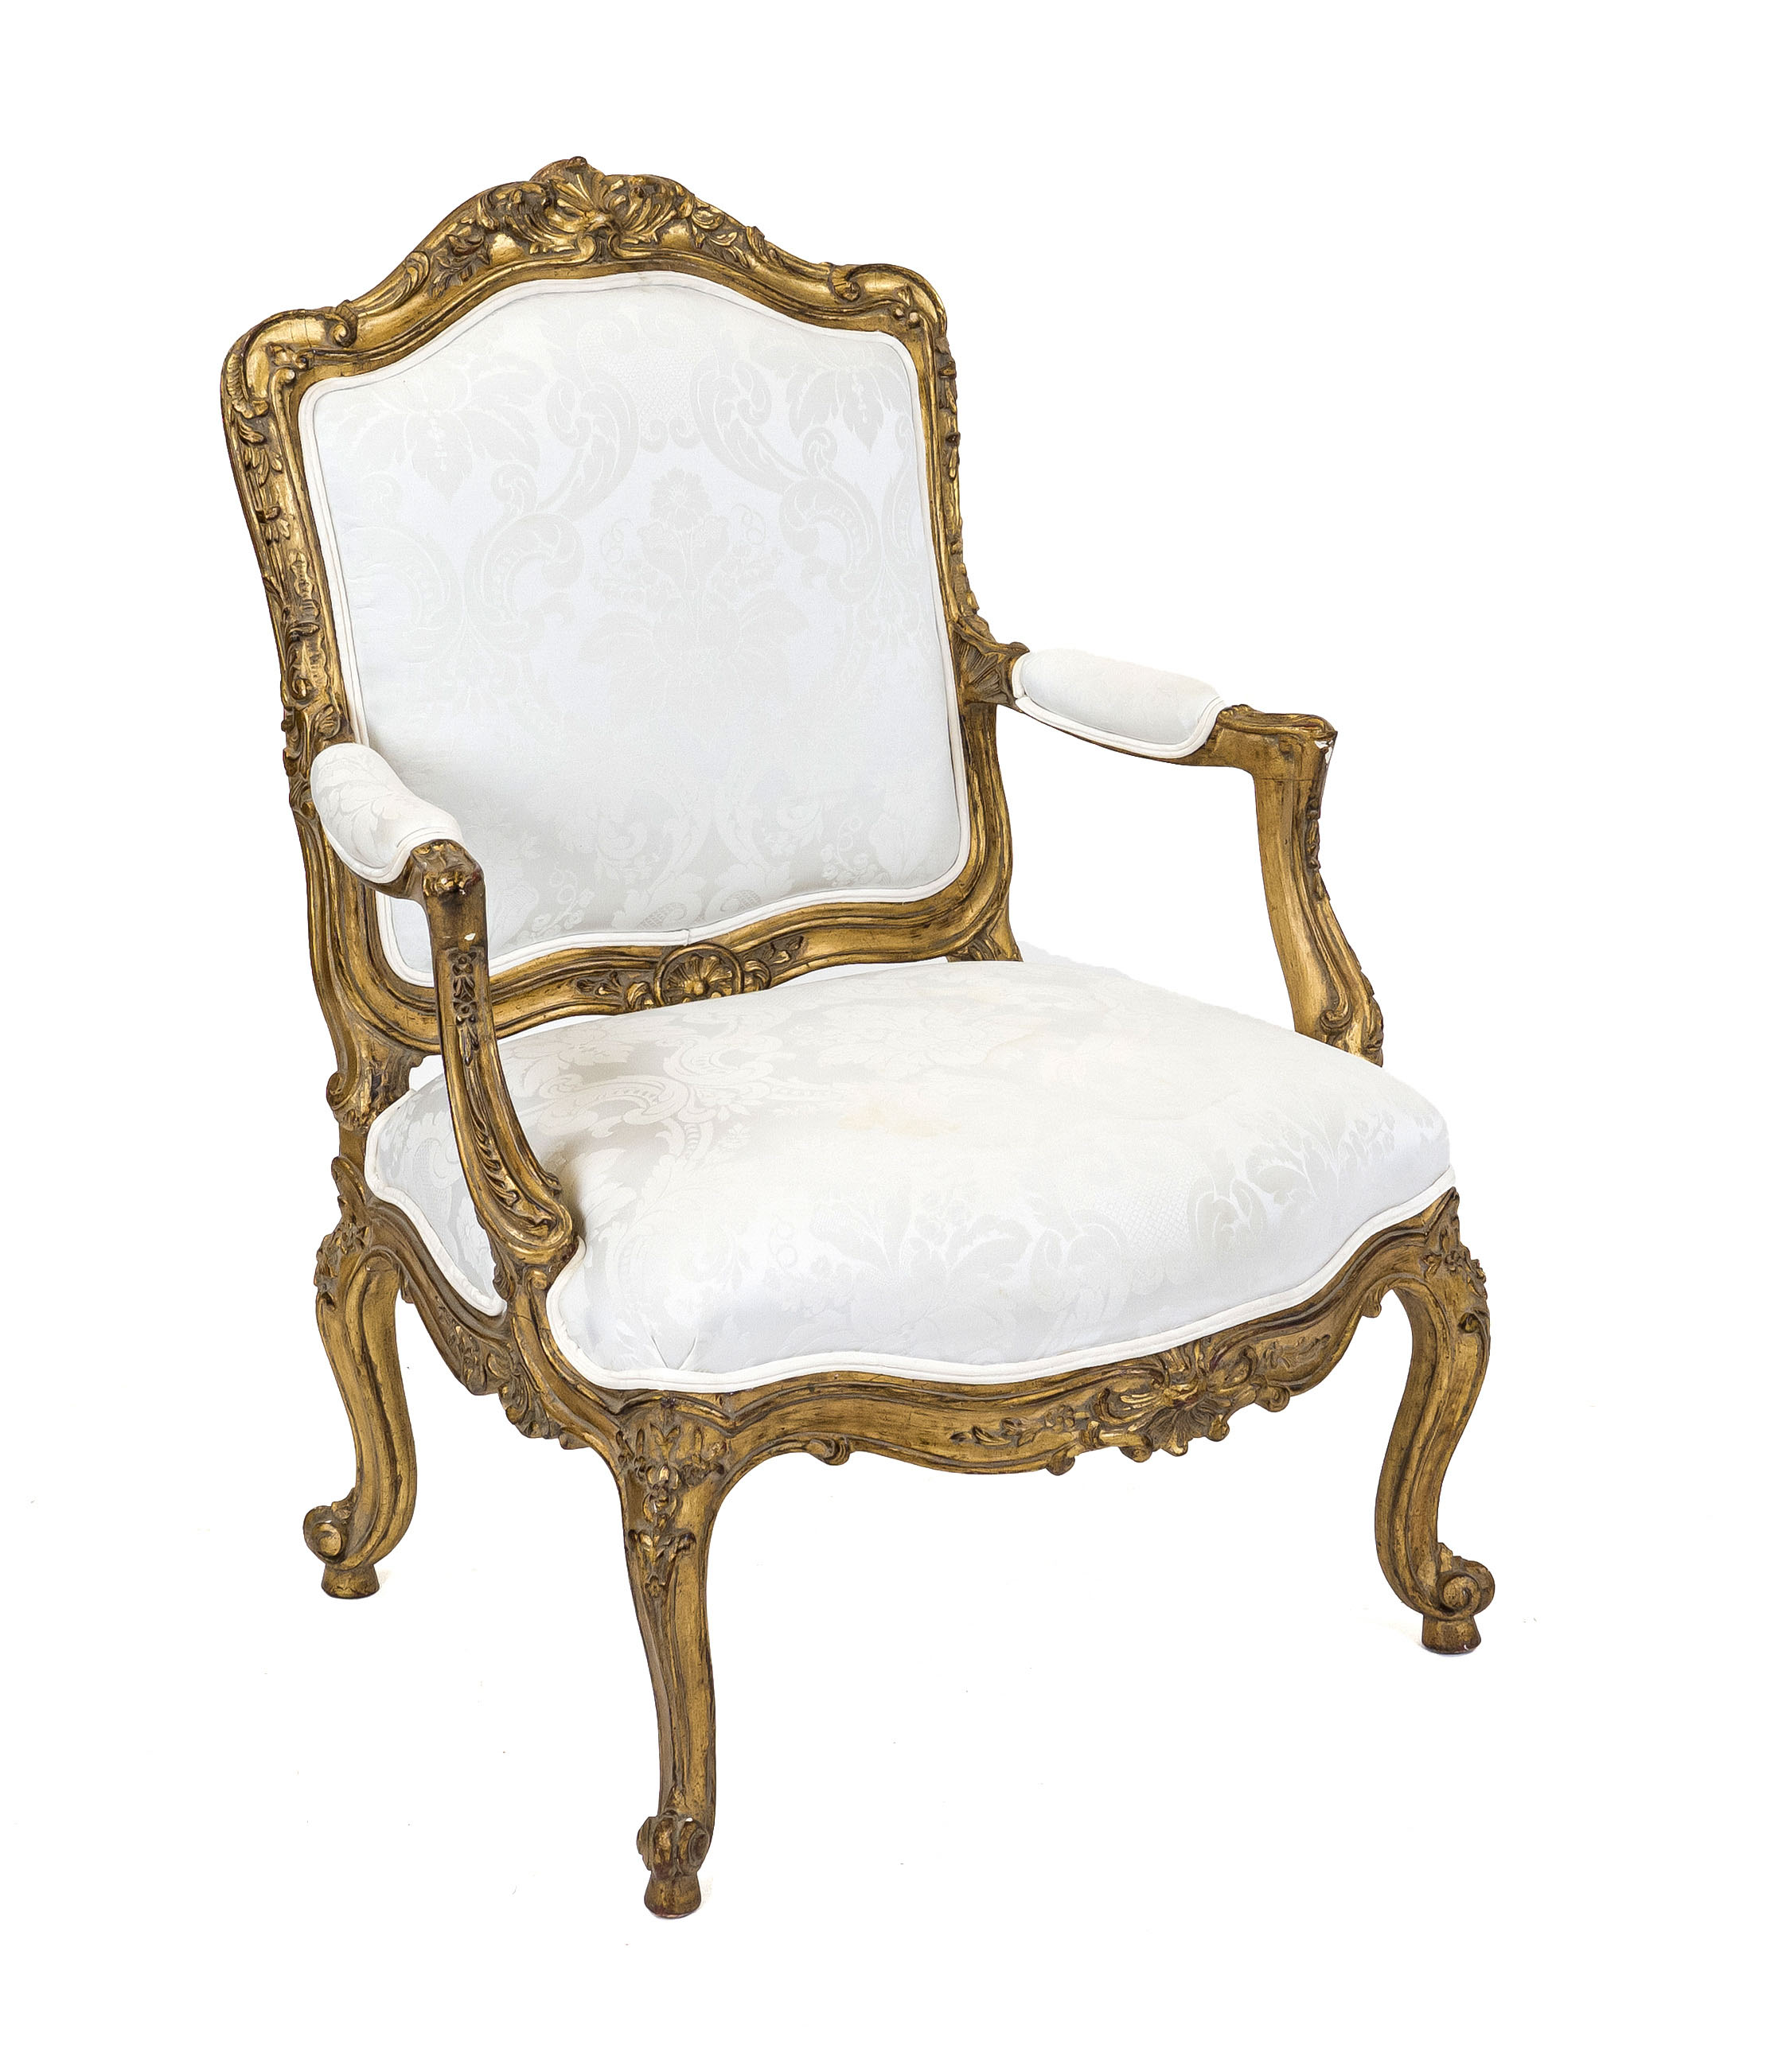 Louis Quinze style armchair, 19th century, carved and gilded beech wood, backrest with rocaille